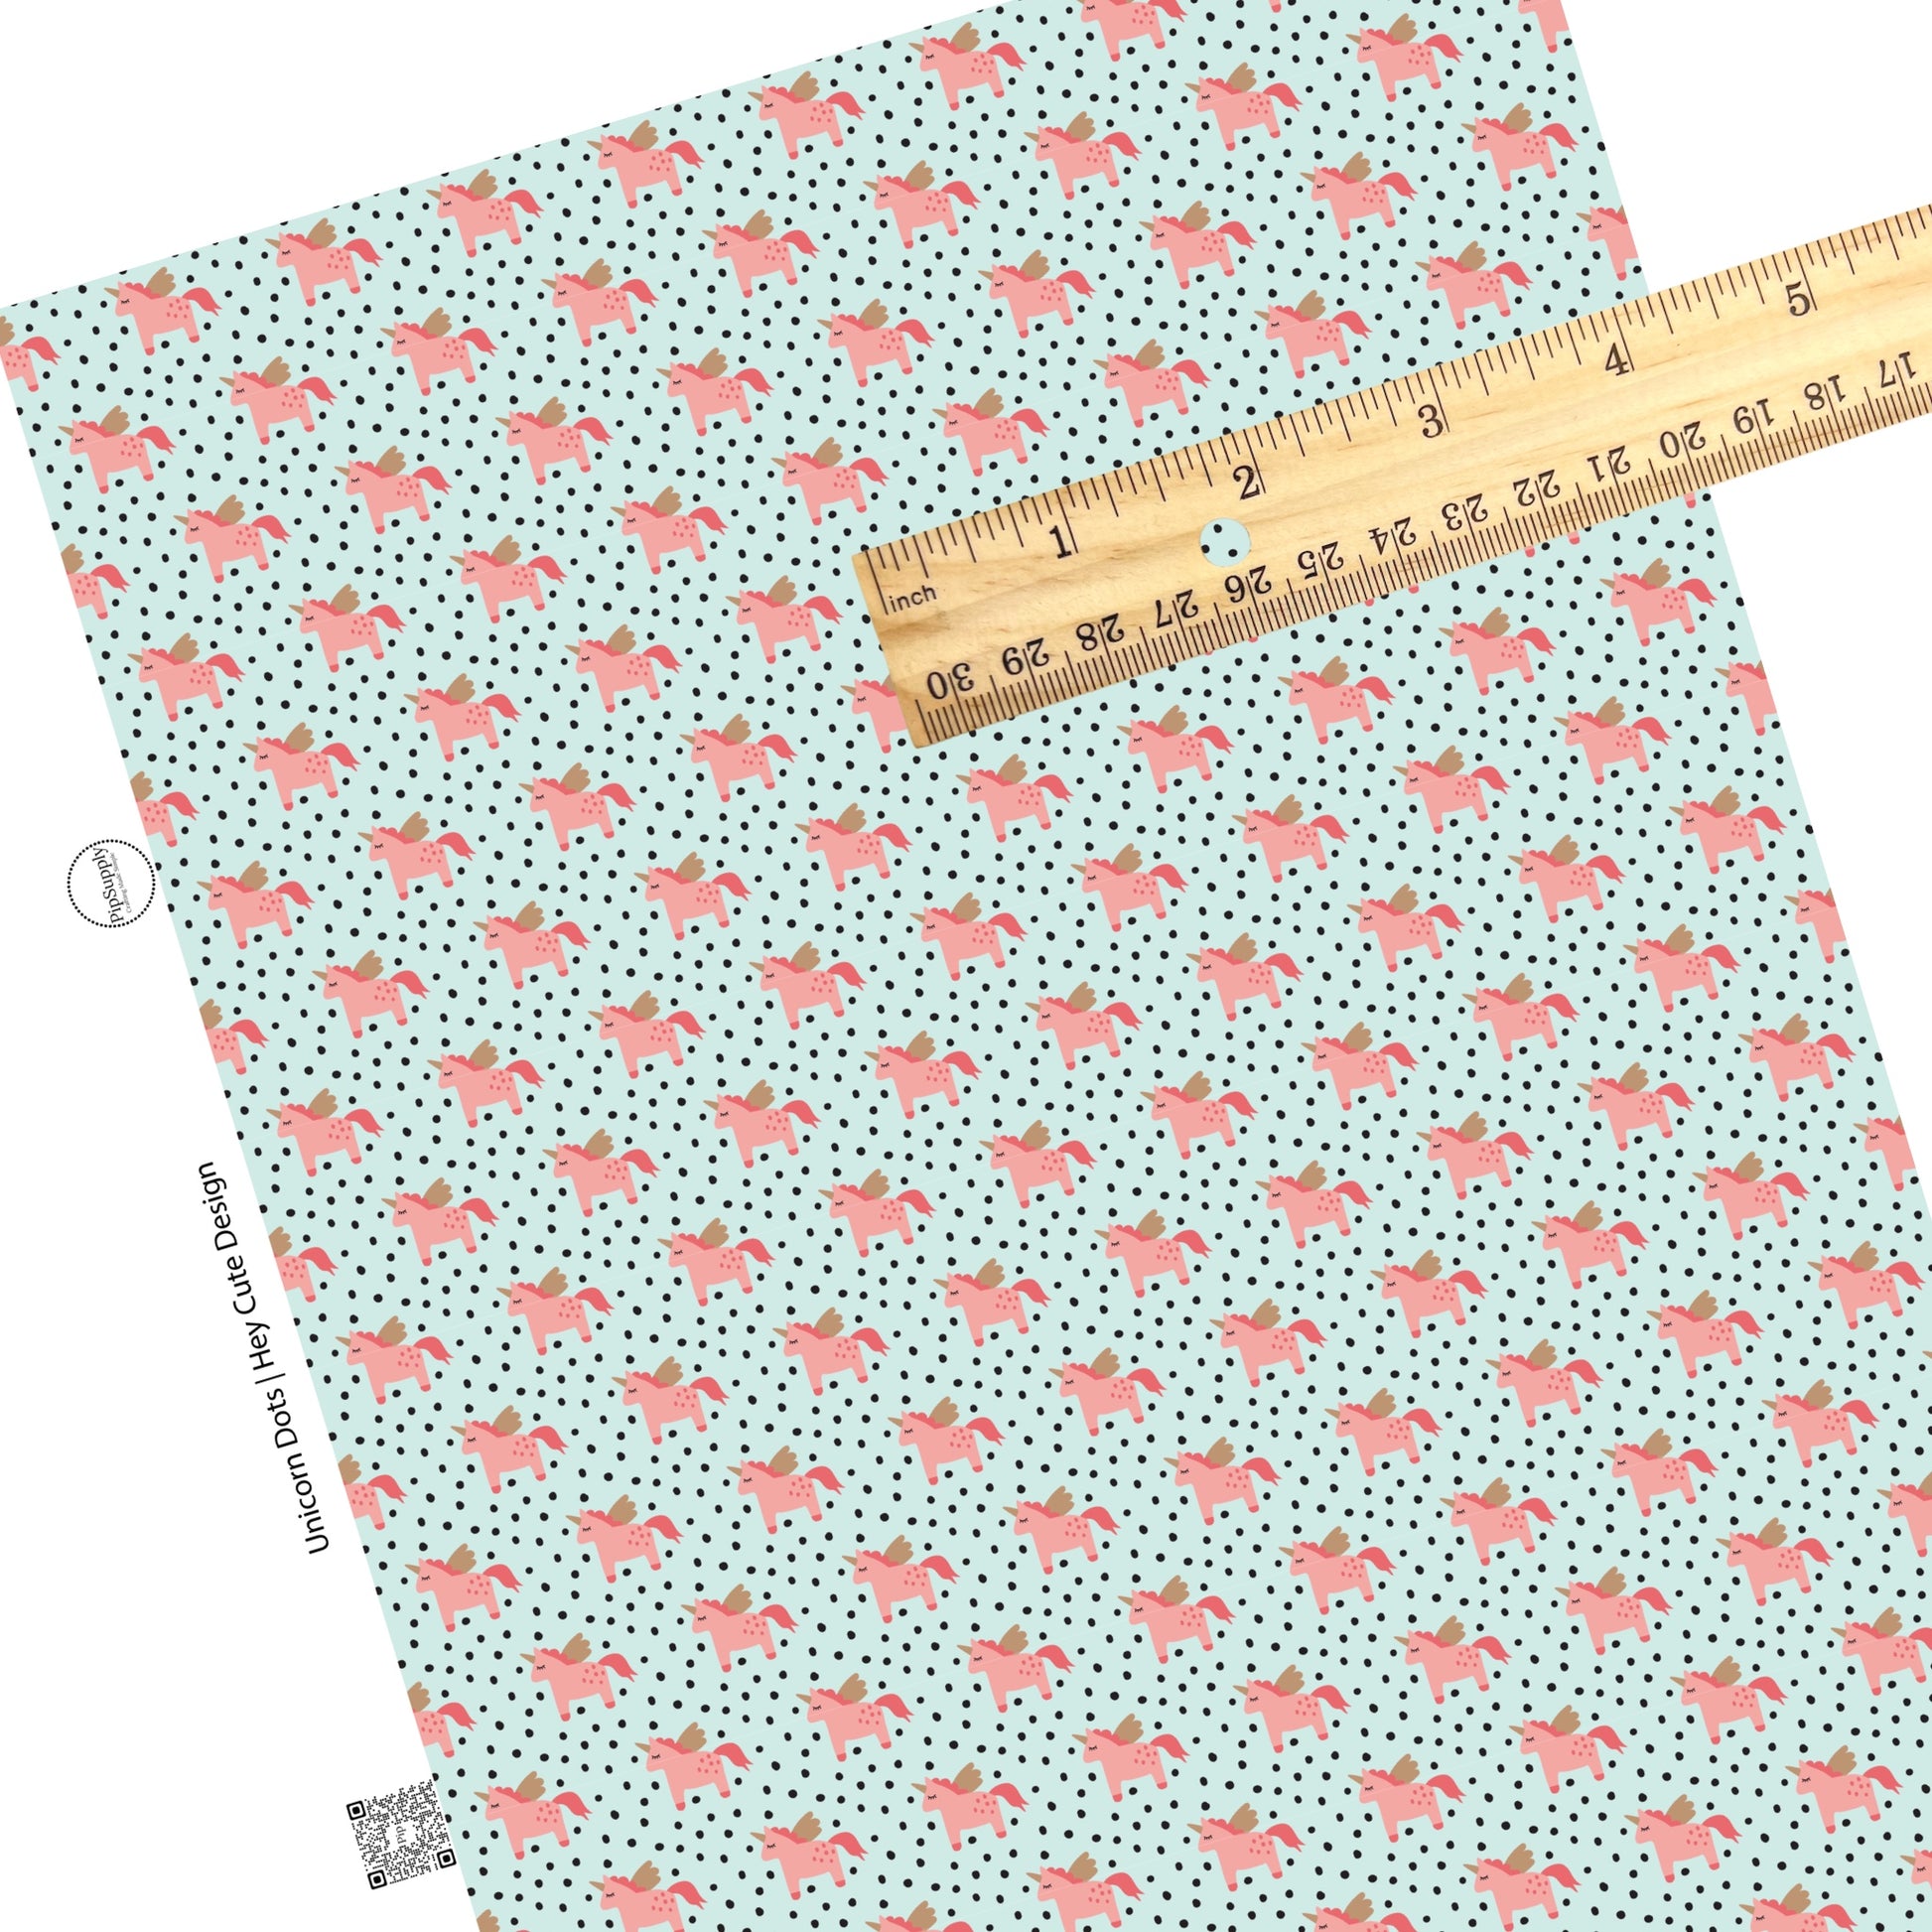 Pink unicorns with  gold horns and wings with black polka dots on aqua faux leather sheets